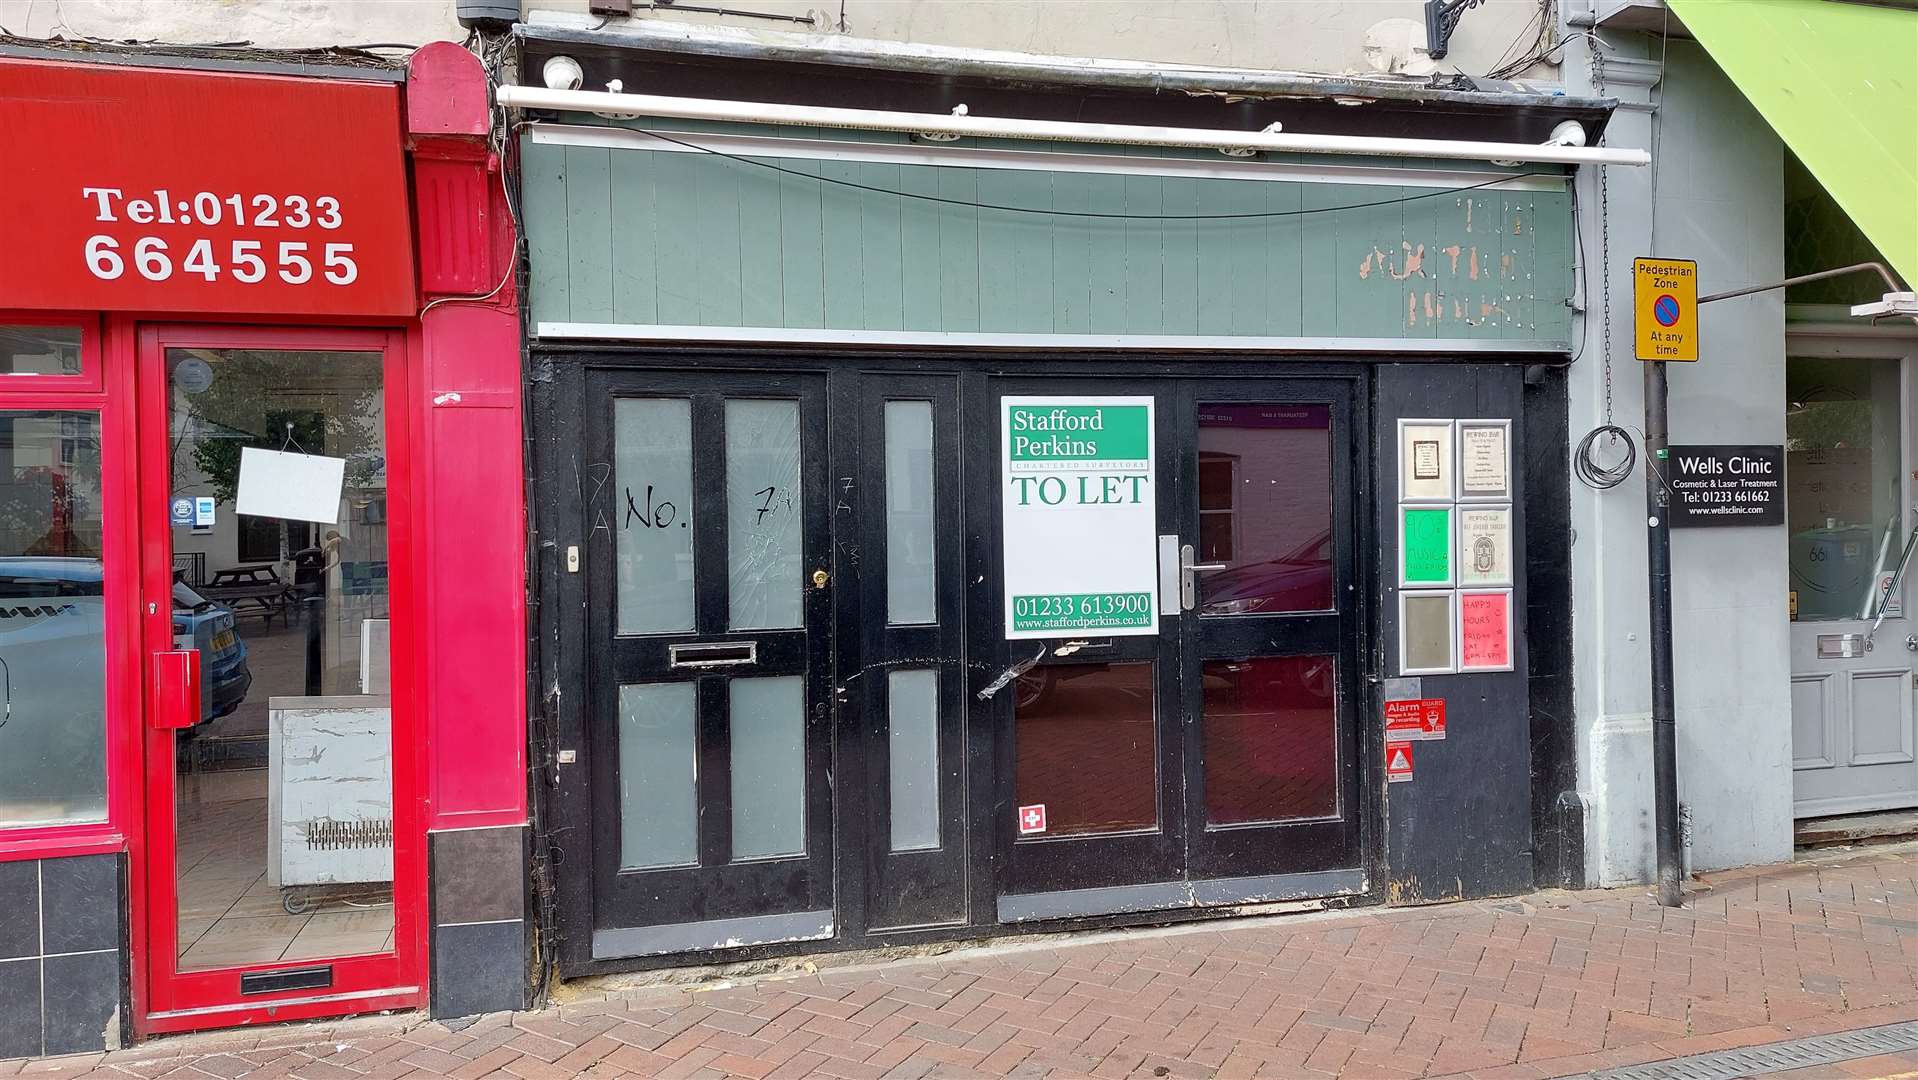 To let signs went up after Rewind Bar closed